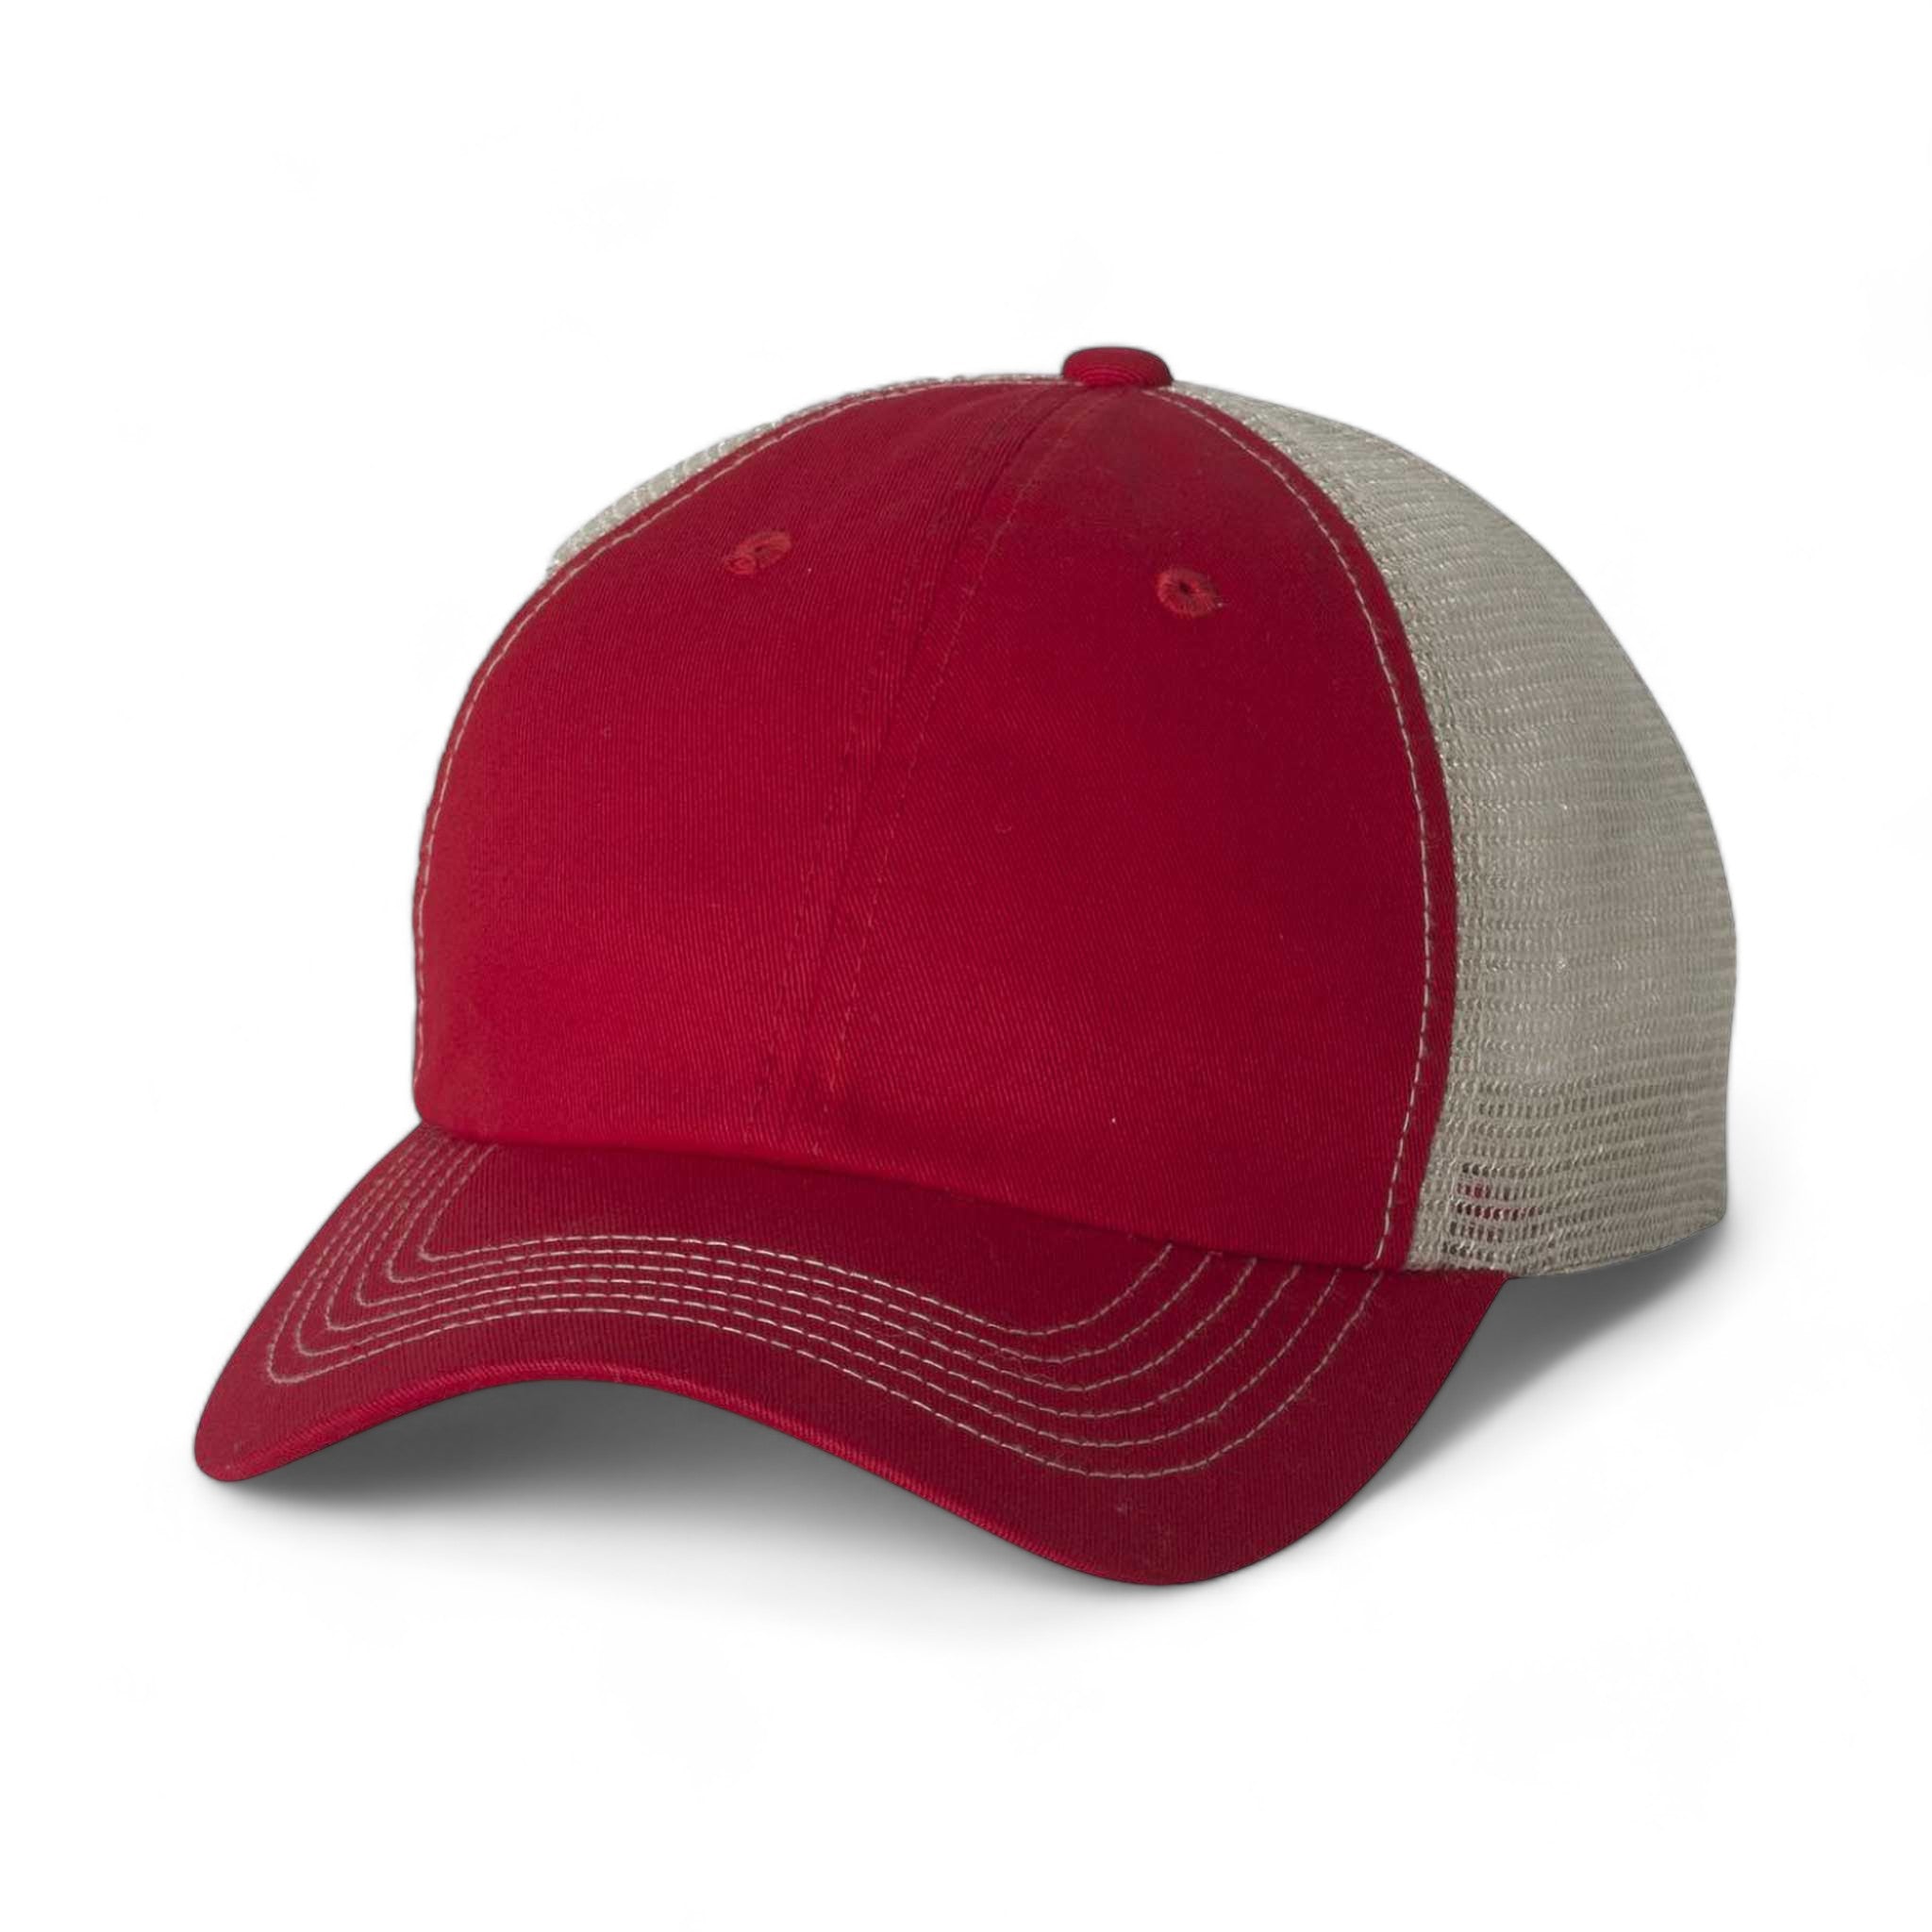 Front view of Sportsman 3100 custom hat in red and stone